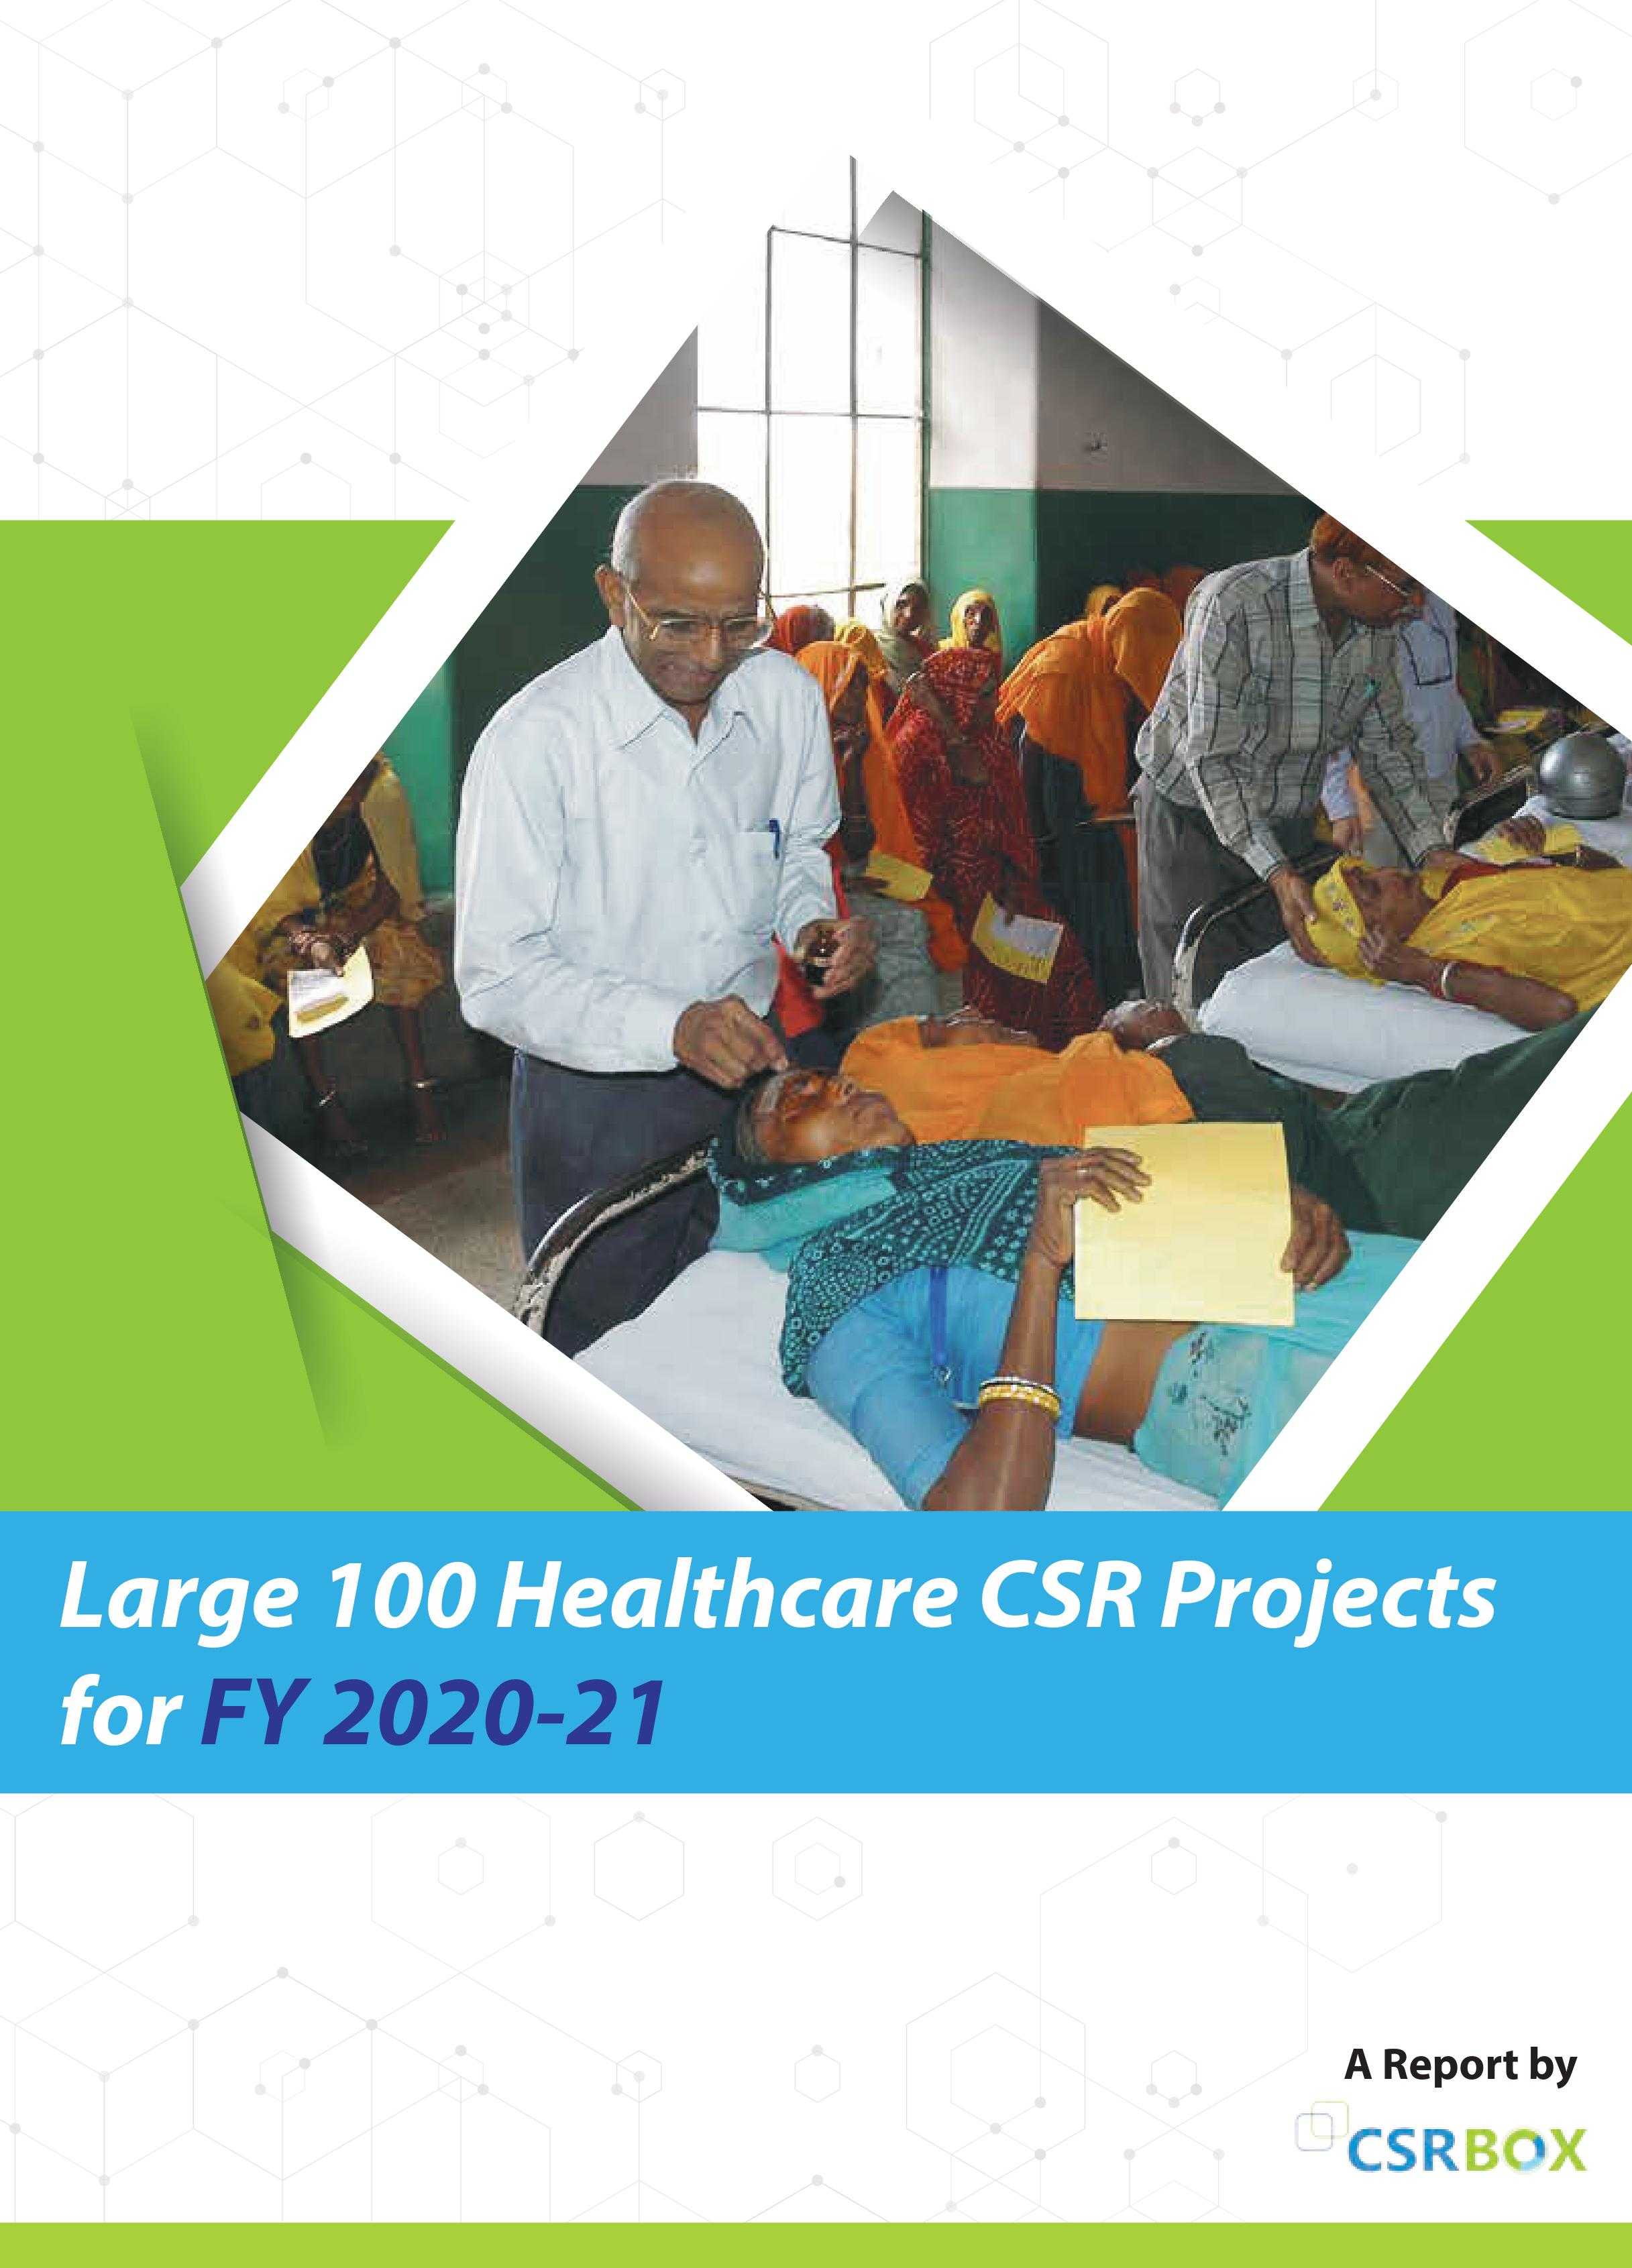 Large 100 Healthcare CSR Projects in India FY 2020-21